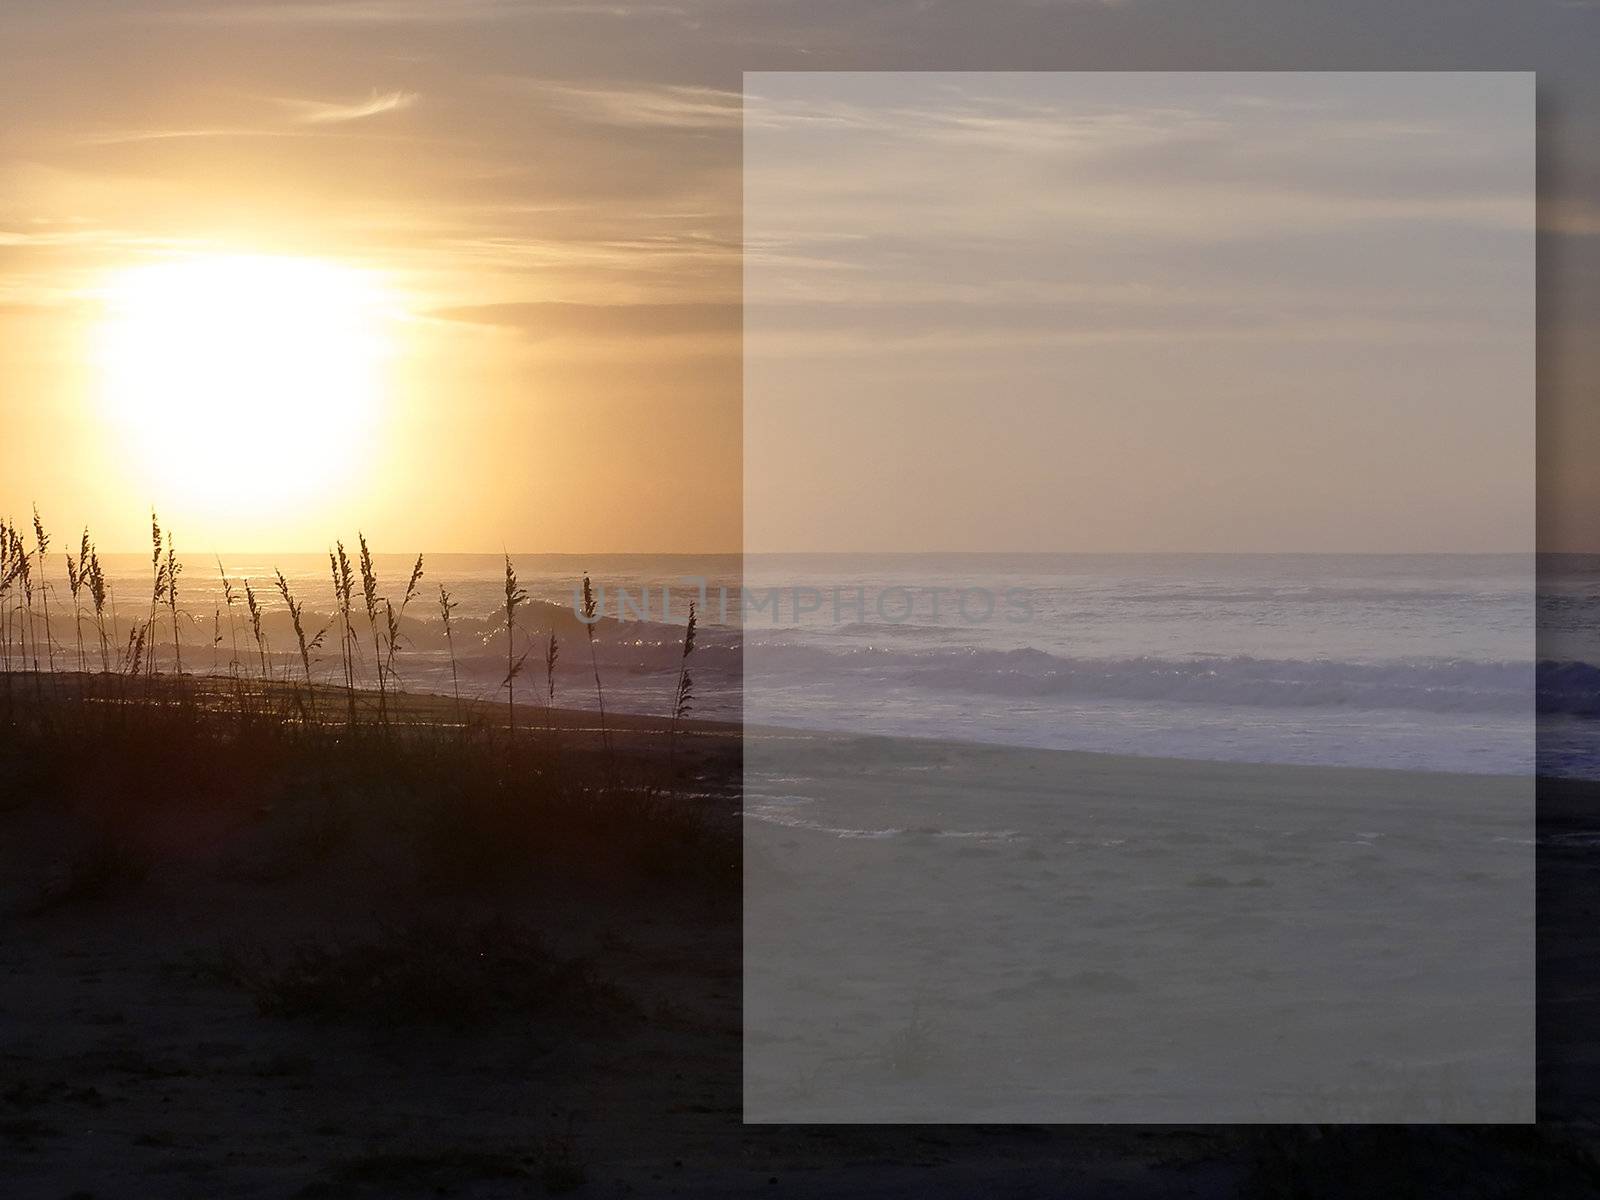 Sunrise on the beach with sea oats in silhouette and a text box